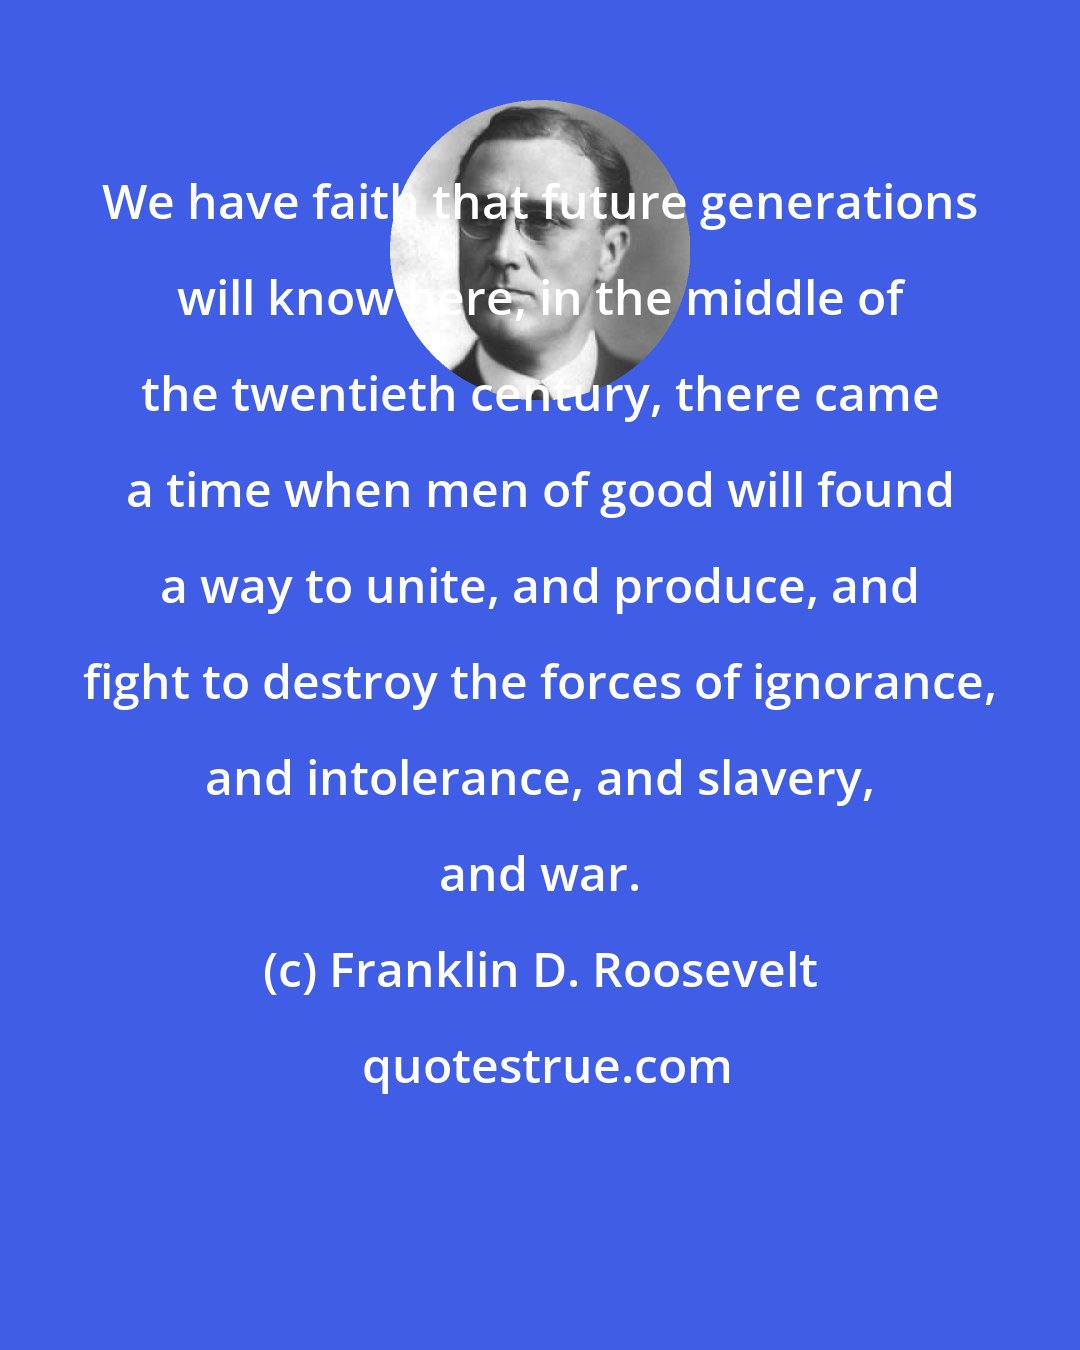 Franklin D. Roosevelt: We have faith that future generations will know here, in the middle of the twentieth century, there came a time when men of good will found a way to unite, and produce, and fight to destroy the forces of ignorance, and intolerance, and slavery, and war.